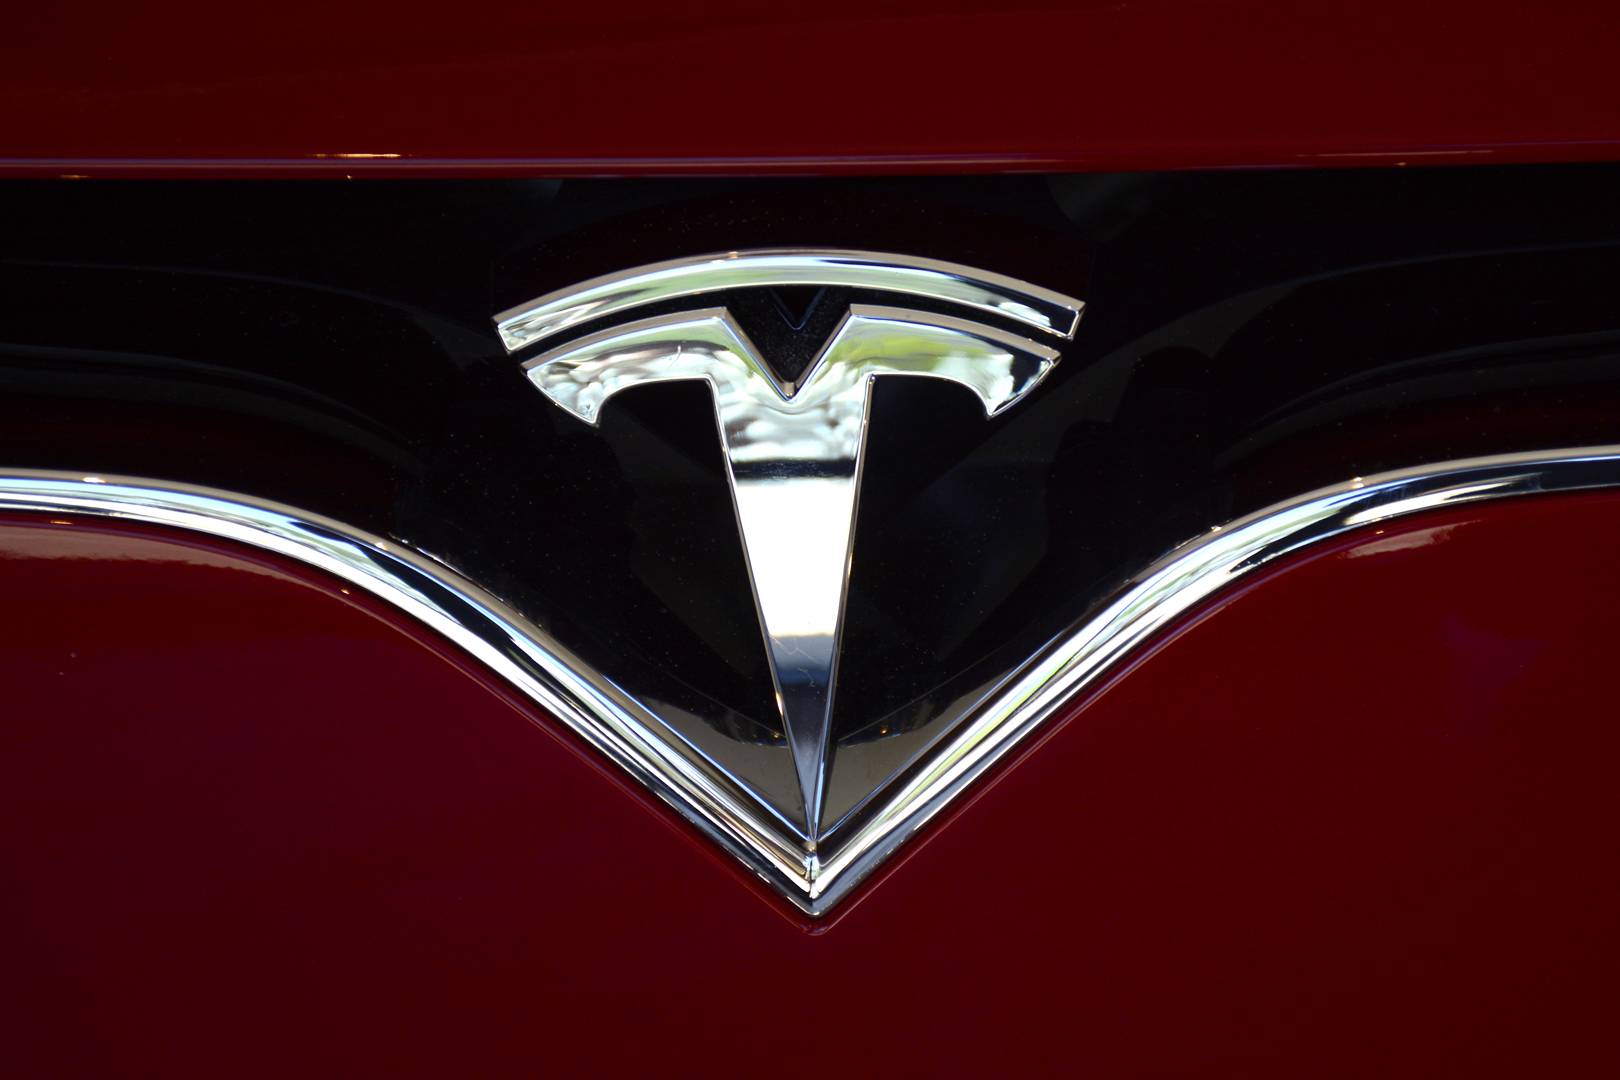 Friday briefing: Tesla sues former staff over alleged trade secret theft